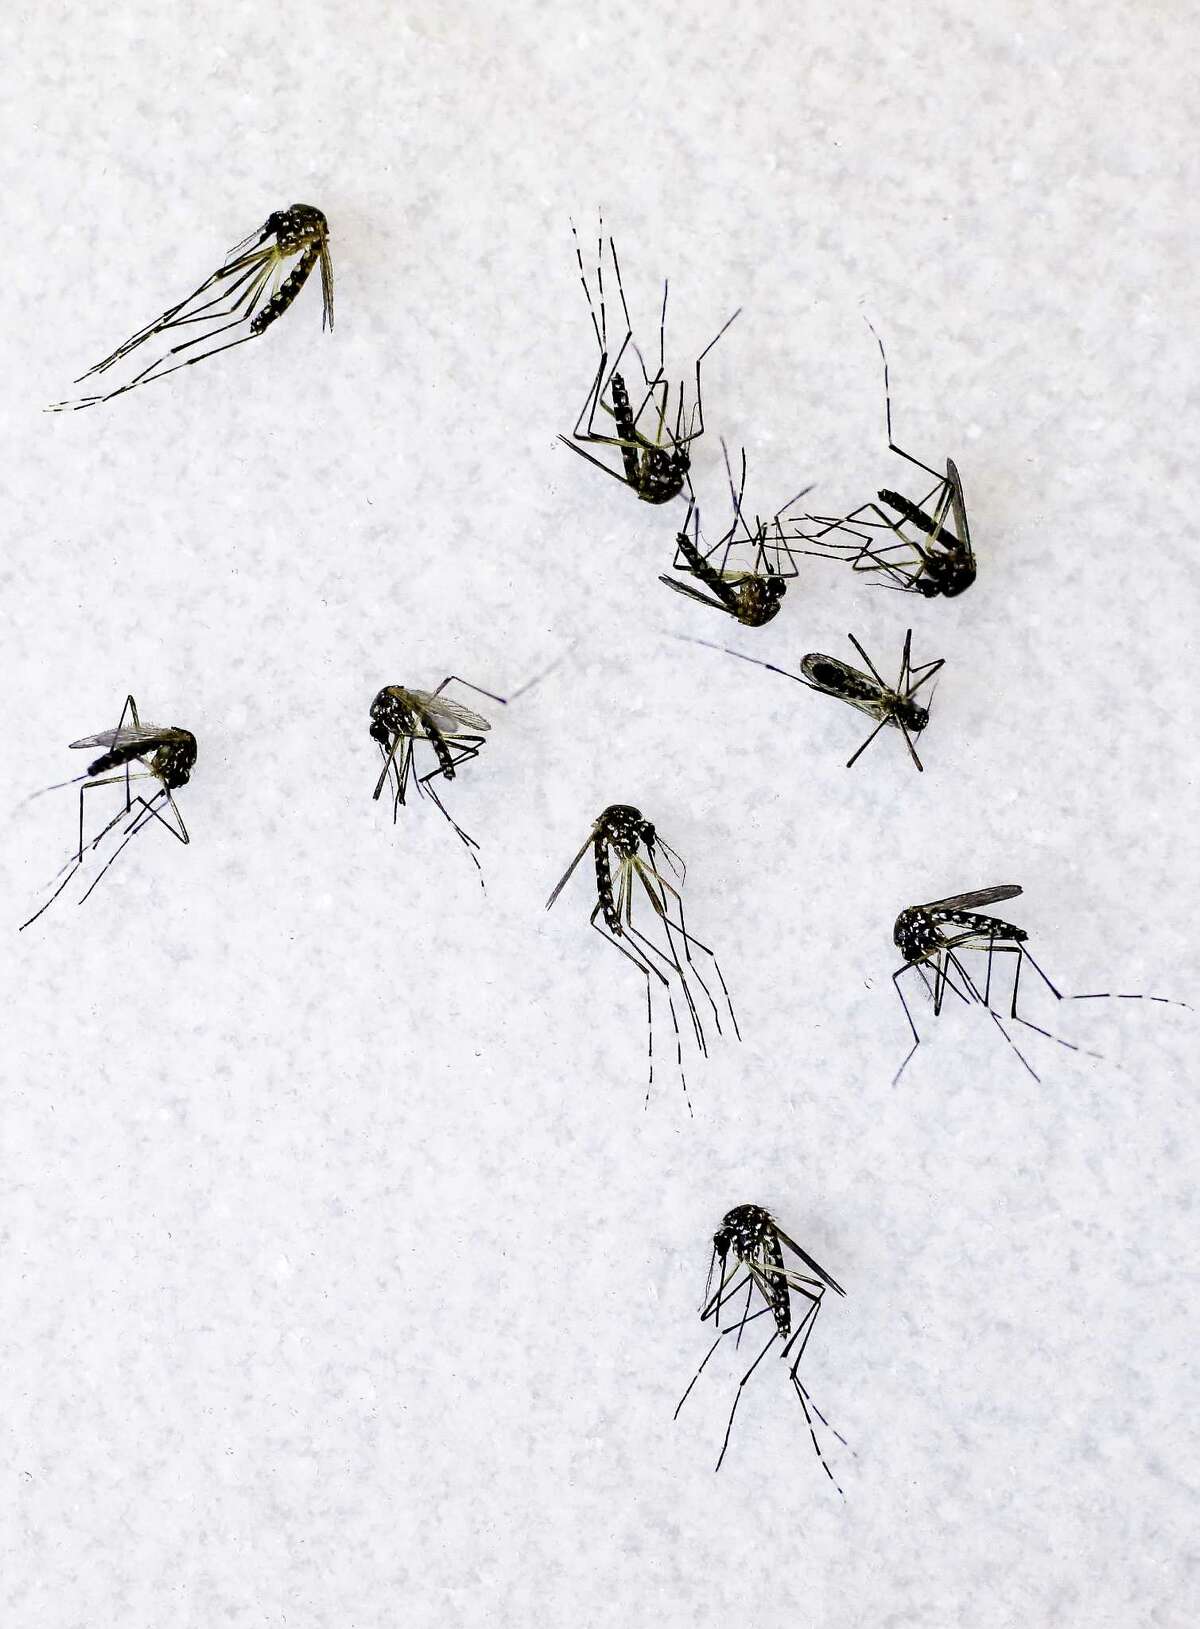 These aedes aegypti mosquitoes can carry the Zika virus. Avoiding bites is the best form of protection.